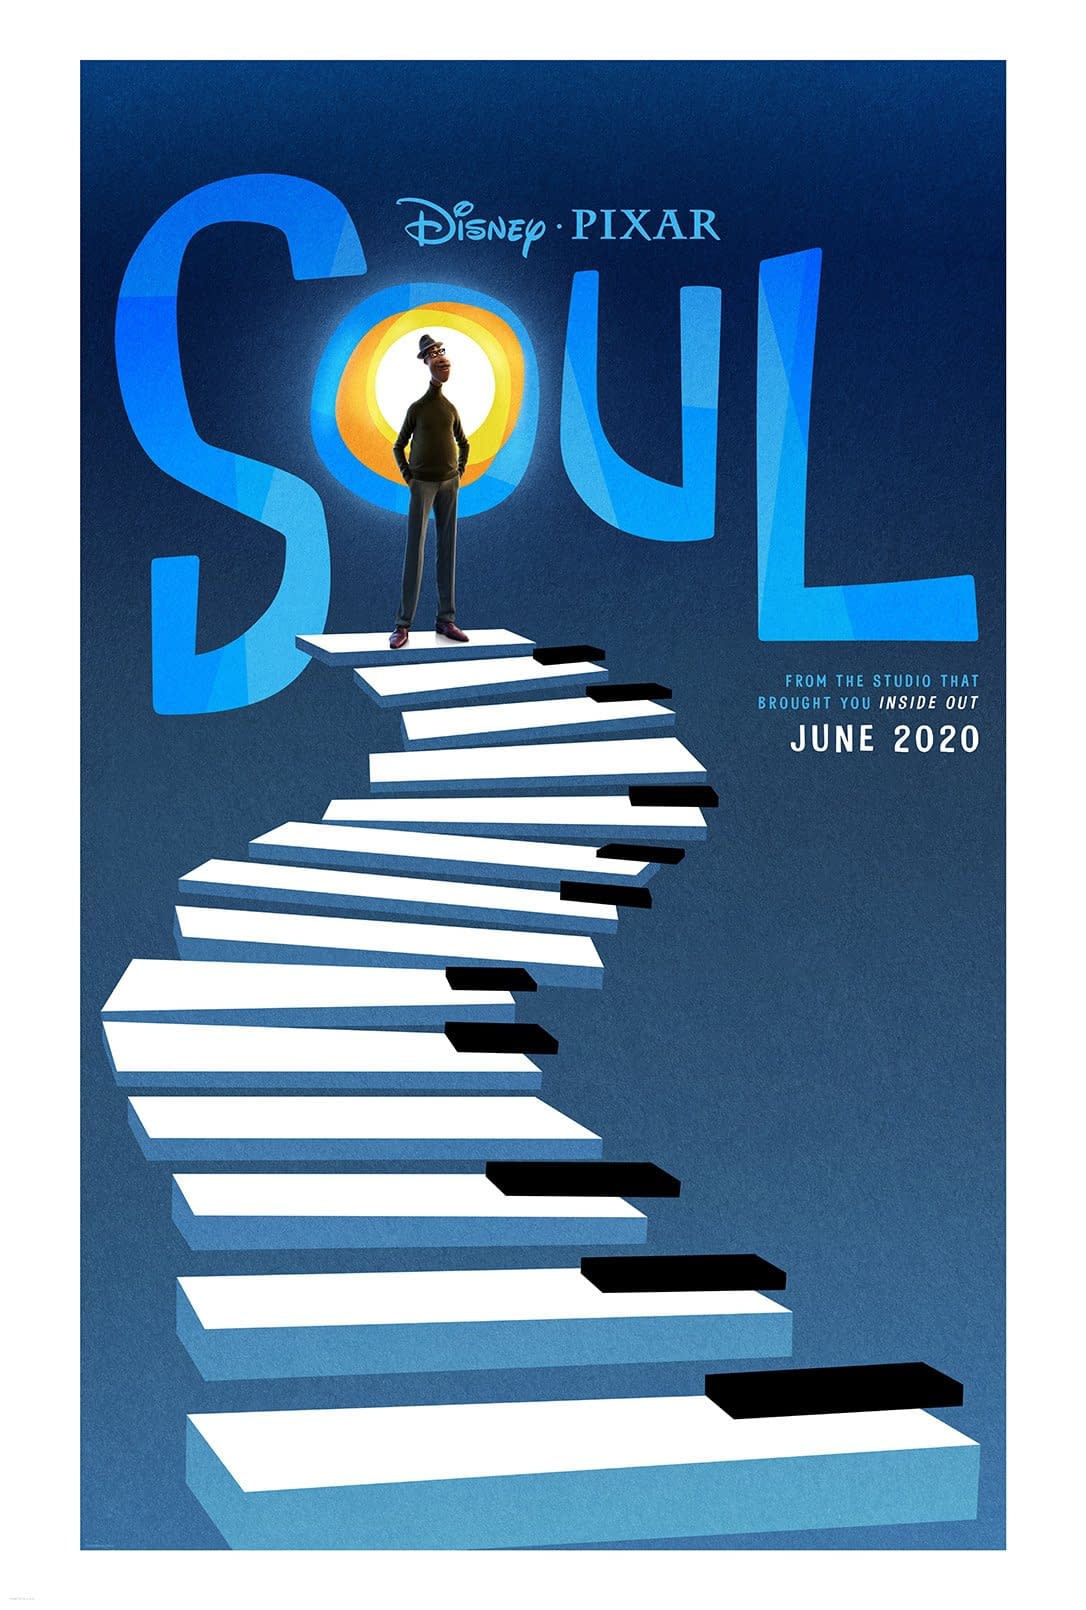 Watch Pixar Tackle the Afterlife in the First Trailer for "Soul"